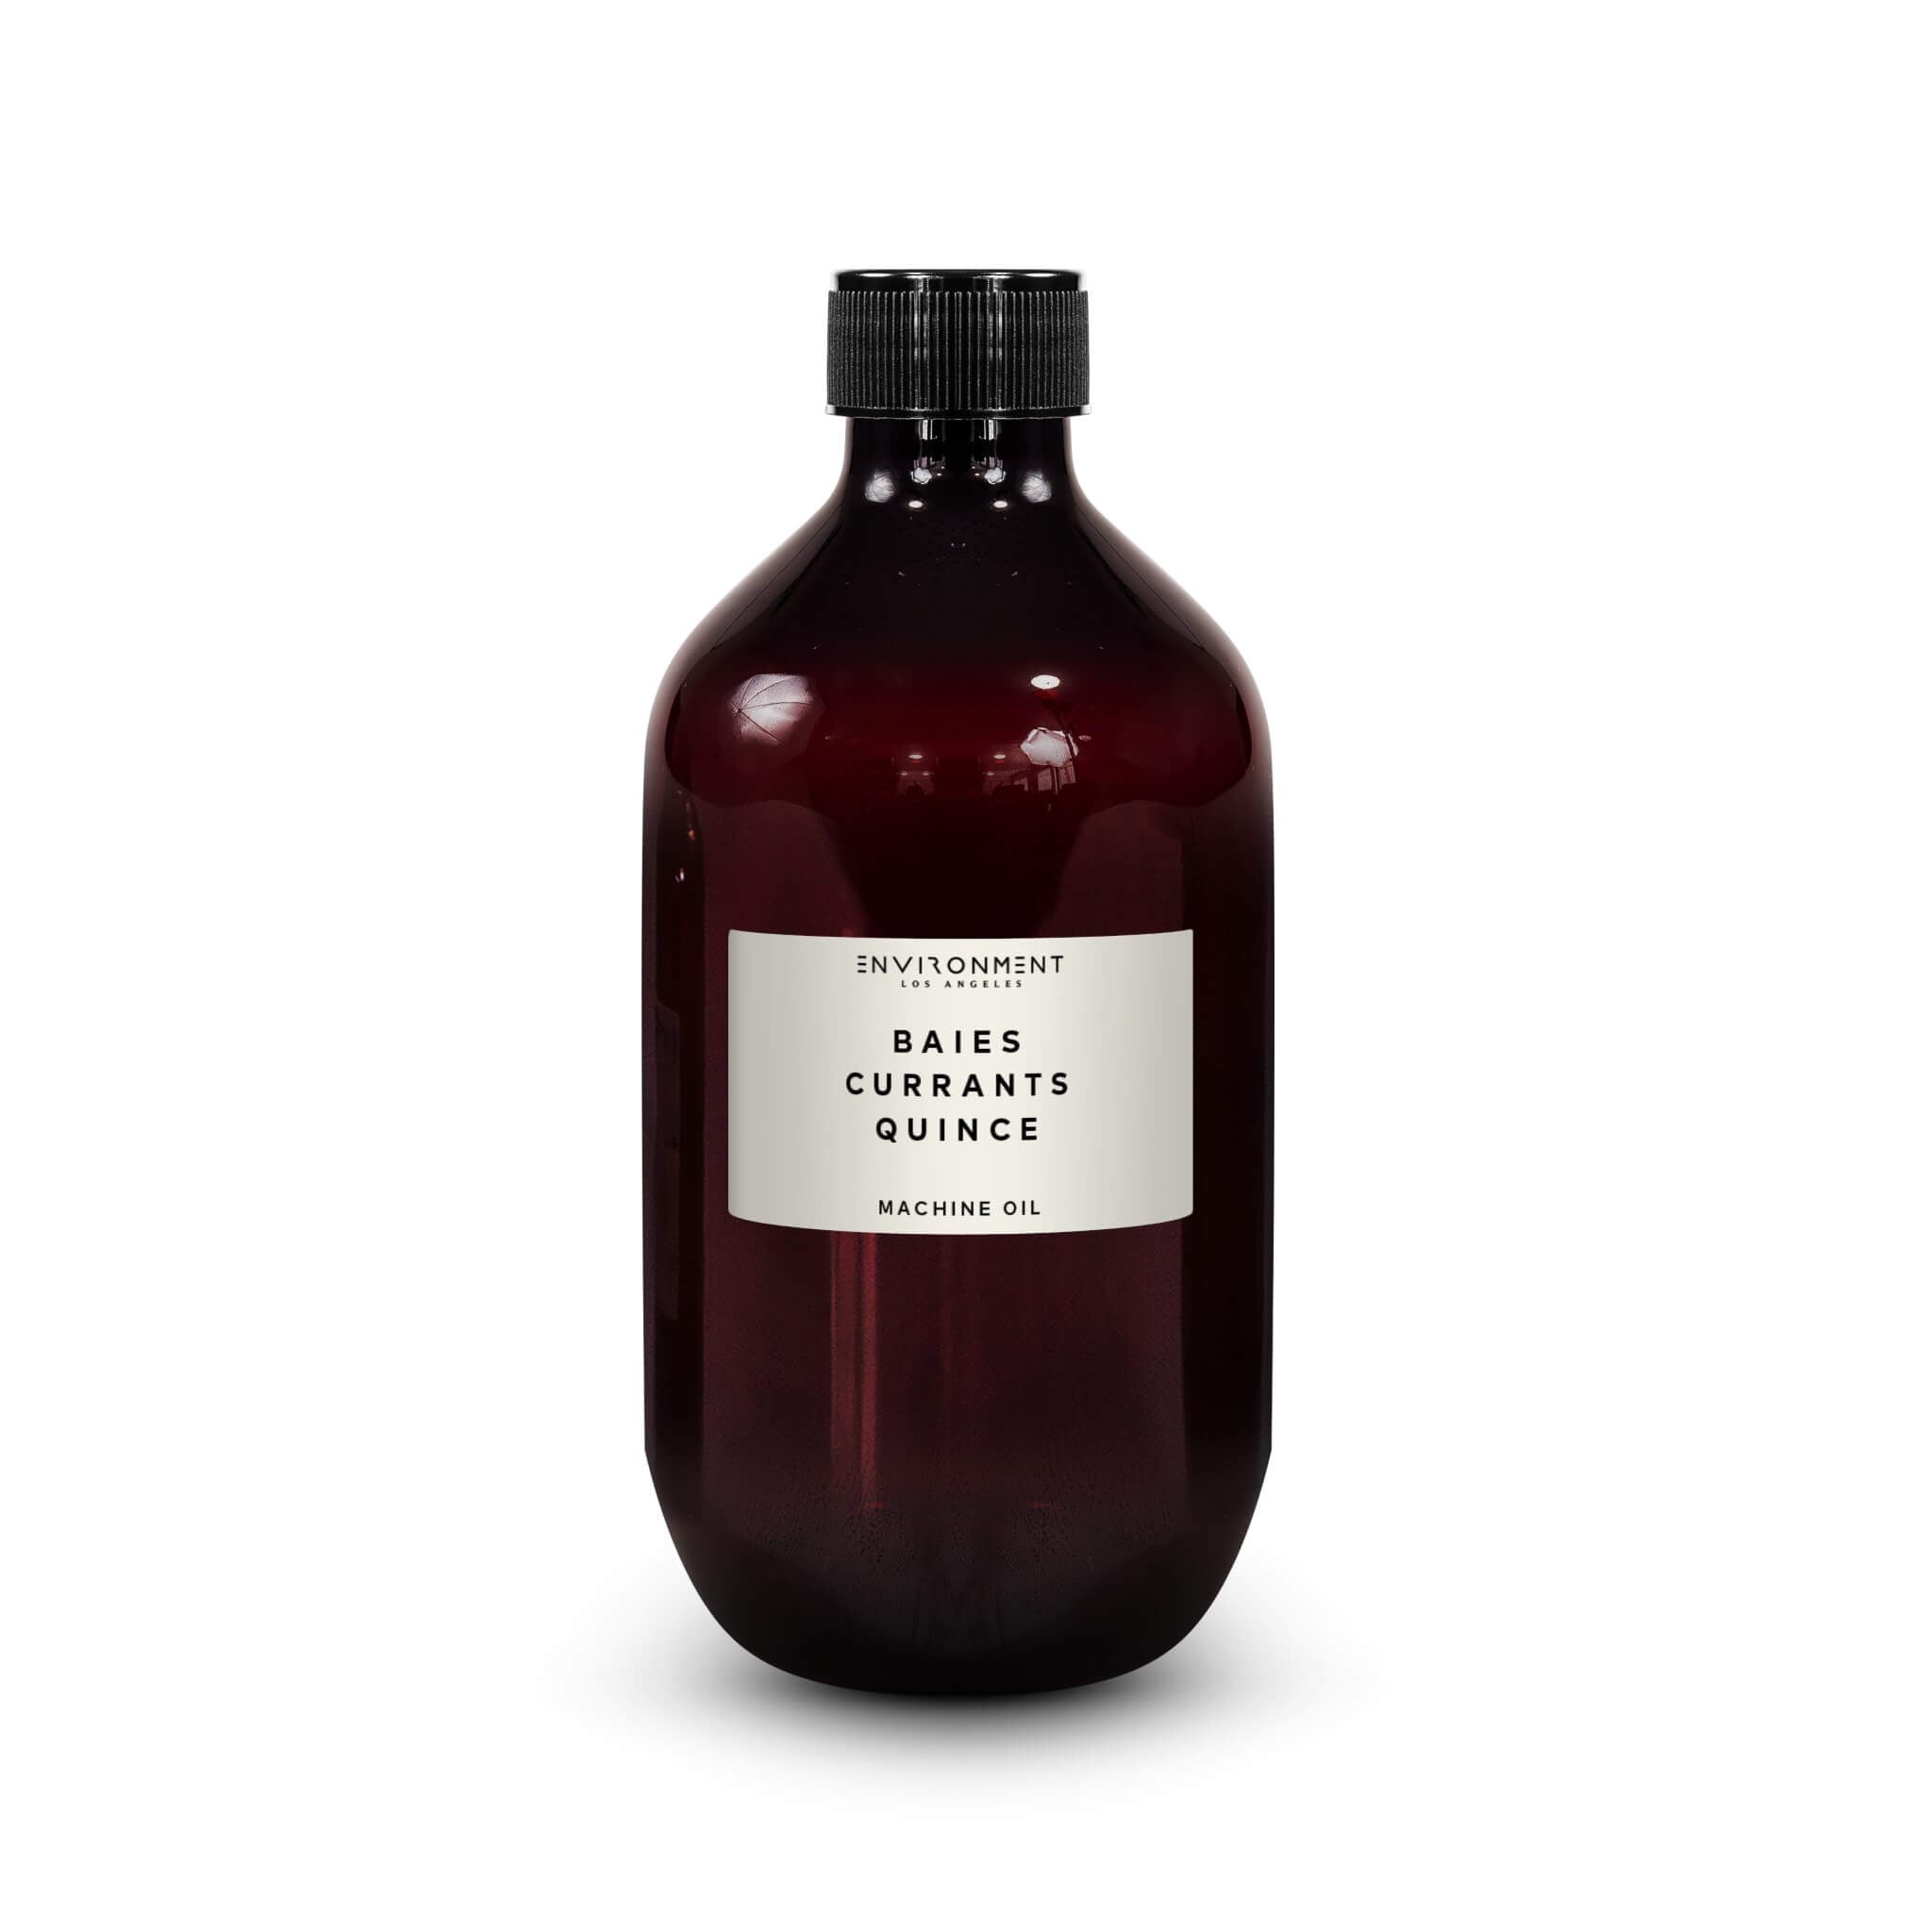 16oz Baies | Currants | Quince Machine Diffusing Oil (Inspired by Diptyque Baies®)